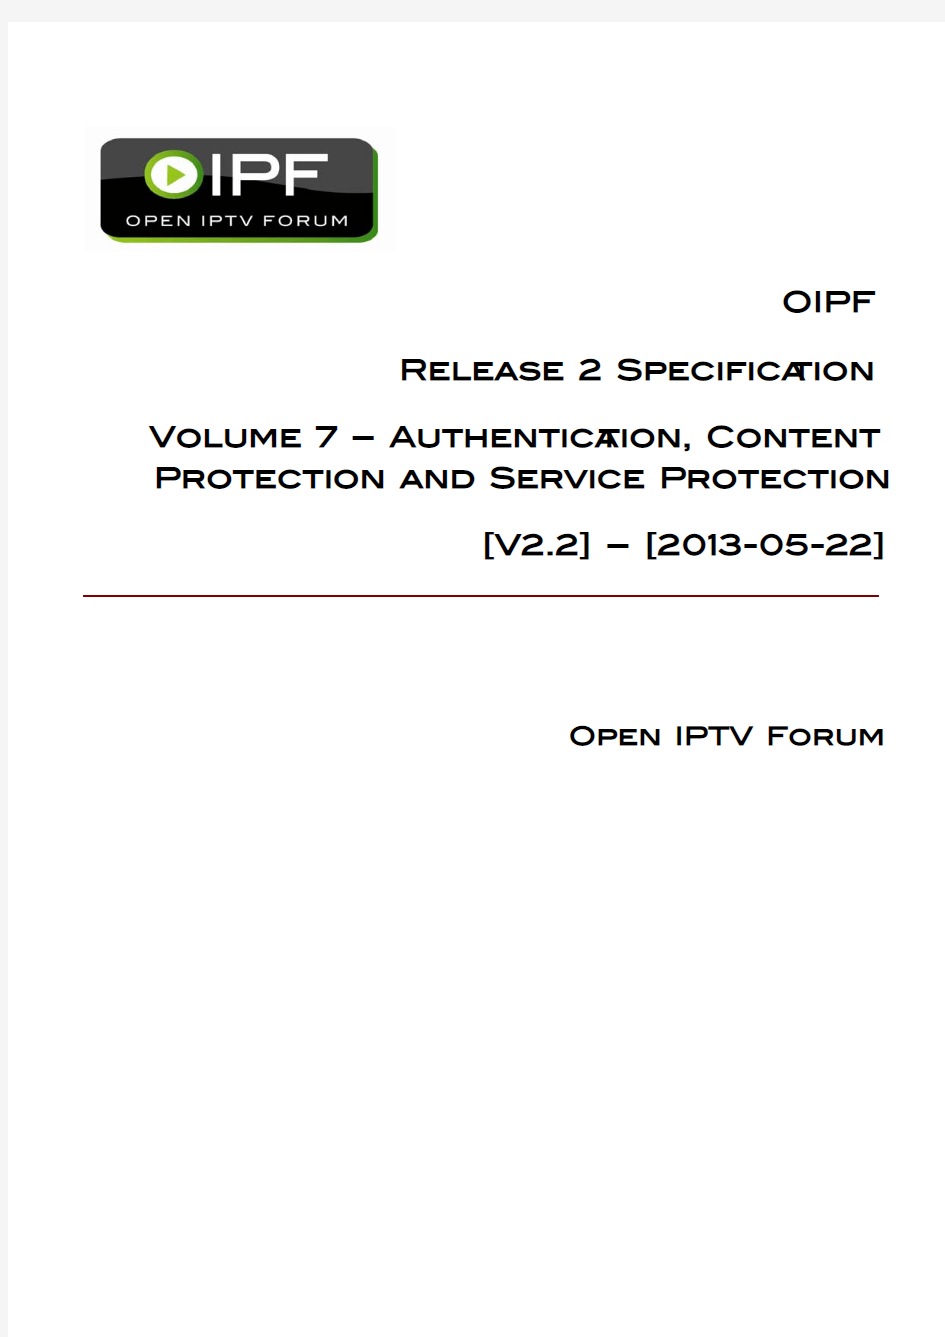 OIPF-T1-R2_Specification-Volume-7-Authentication-Content-Protection-and-Service